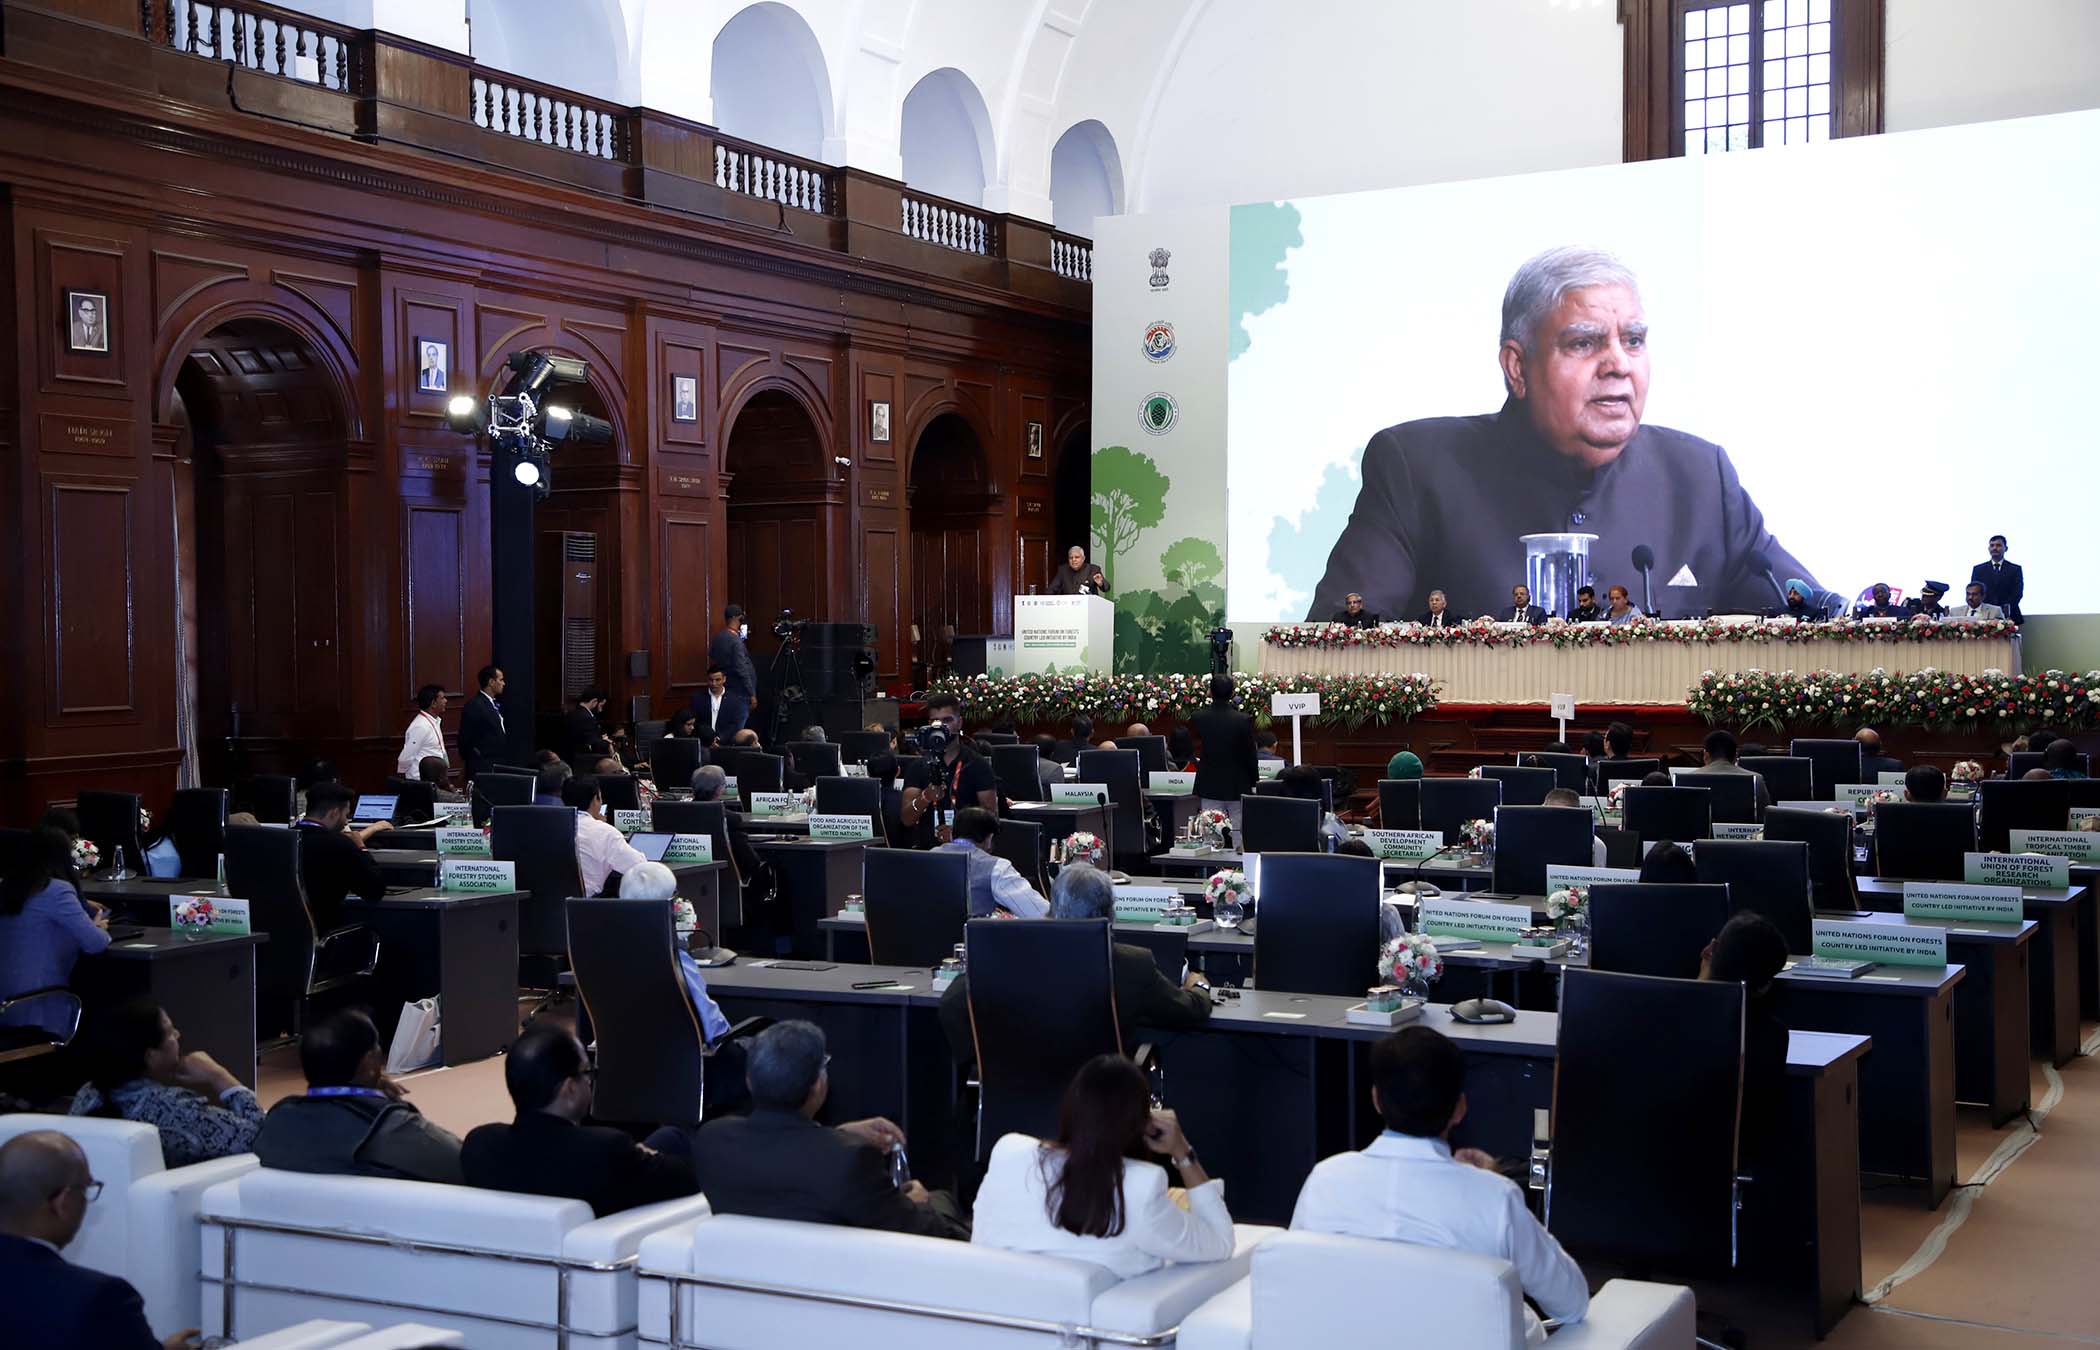 The Vice-President, Shri Jagdeep Dhankhar addressing the United Nations Forum on Forests (UNFF) Country-Led Initiative by India at Forest Research Institute (FRI) in Dehradun, Uttarakhand on October 27, 2023.